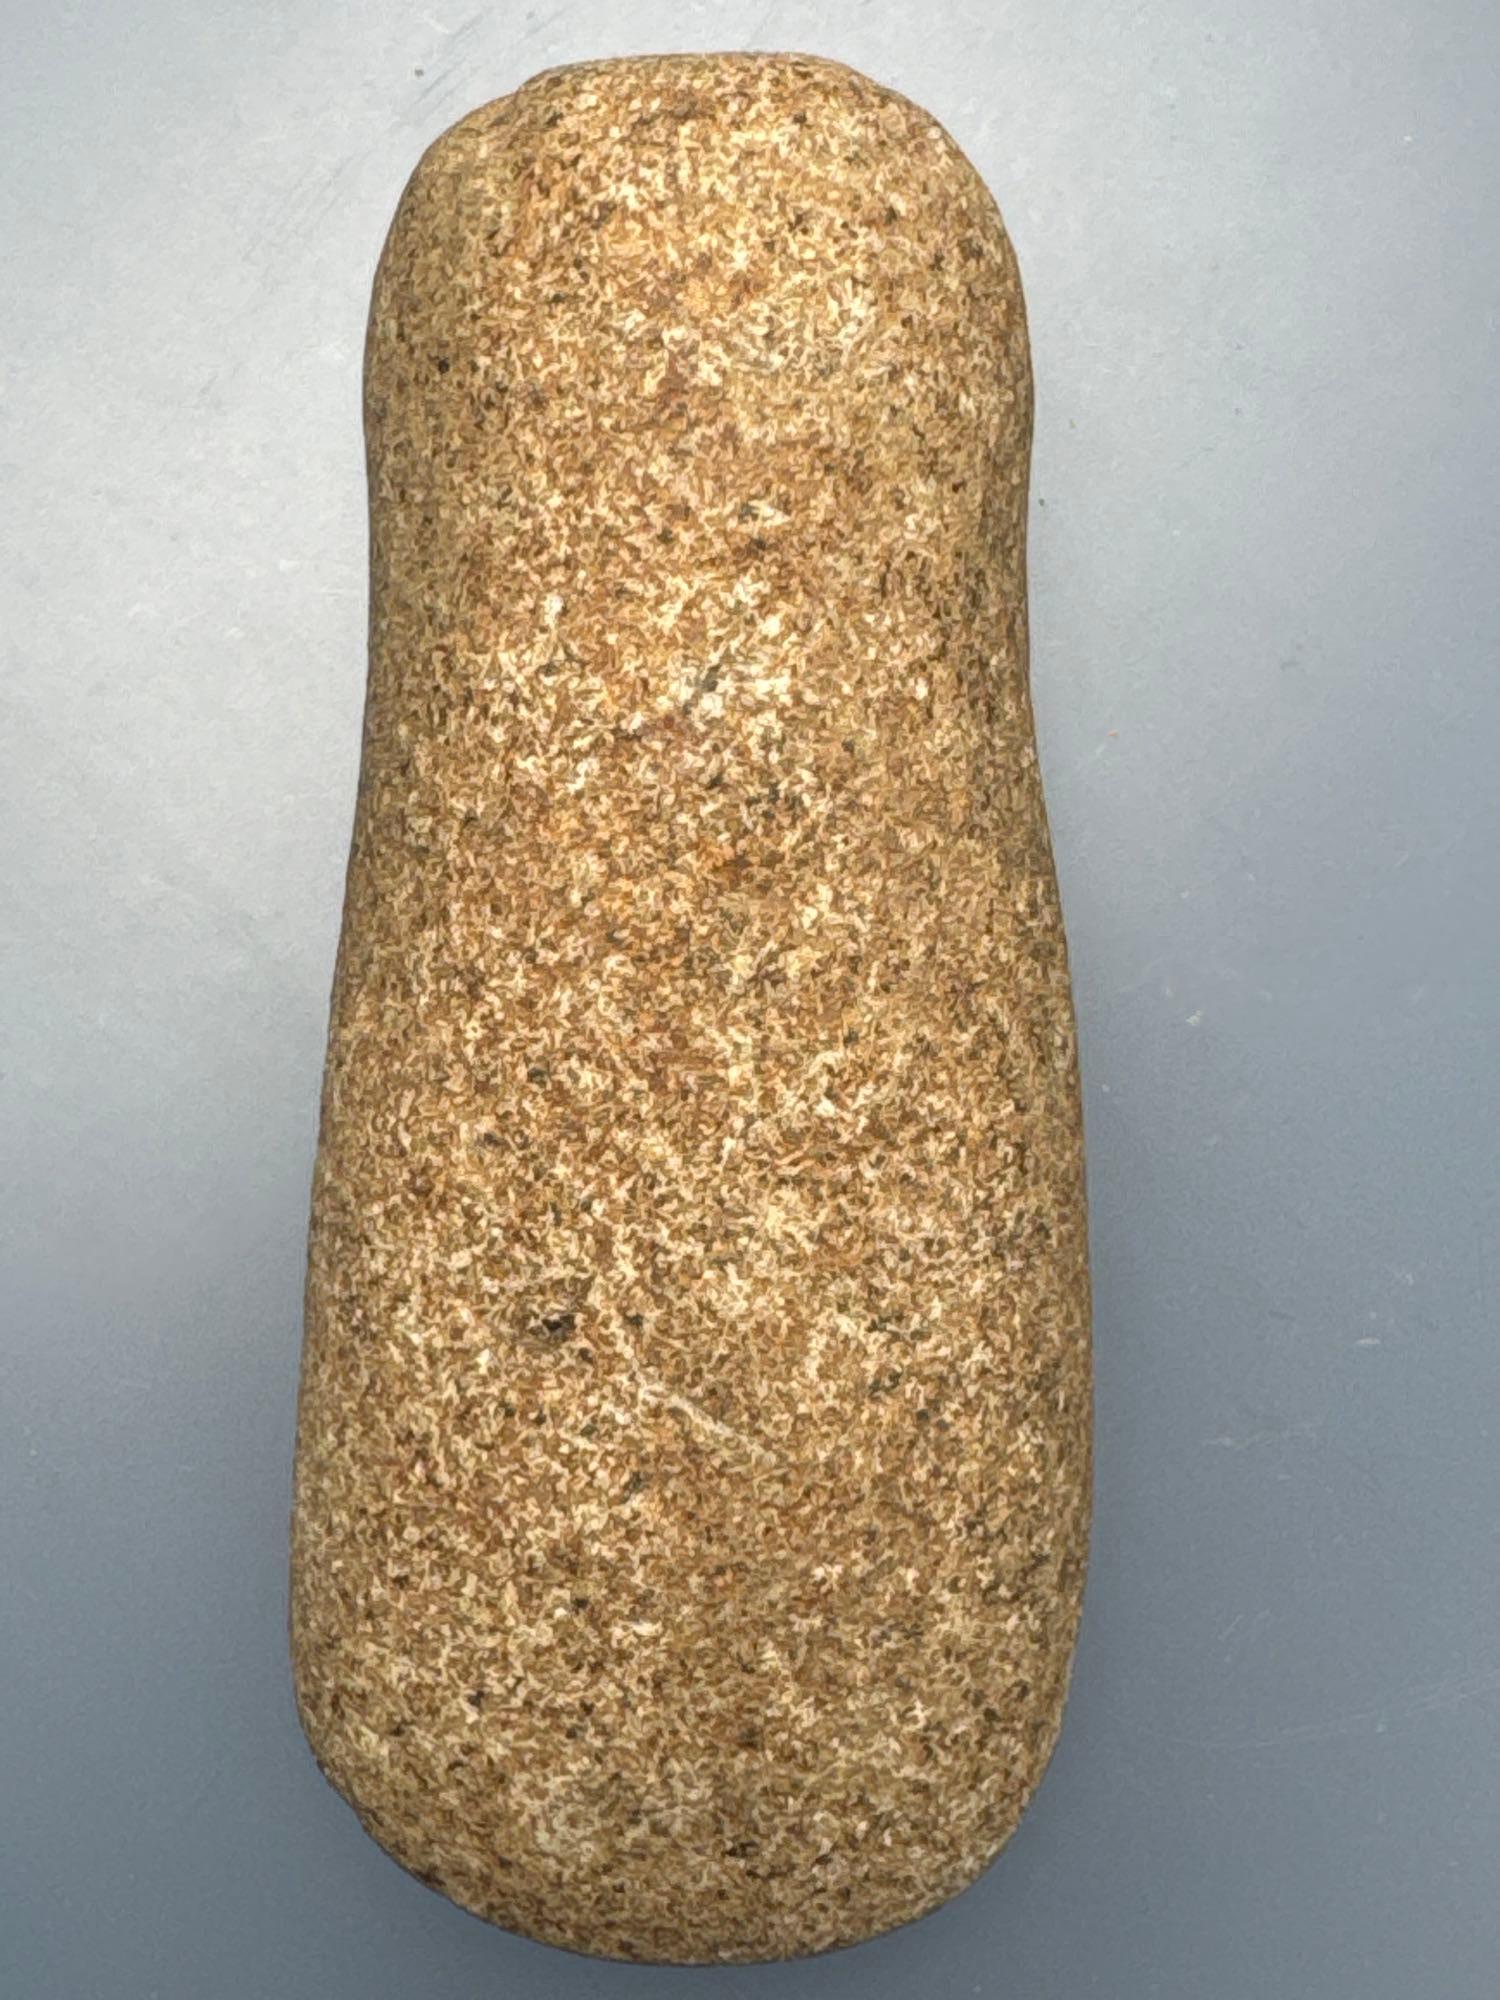 NICE 5 1/4" Grooved Adze, Rare Style, Great Condition, Made of Granite, Found in Athens Co., Ohio, E